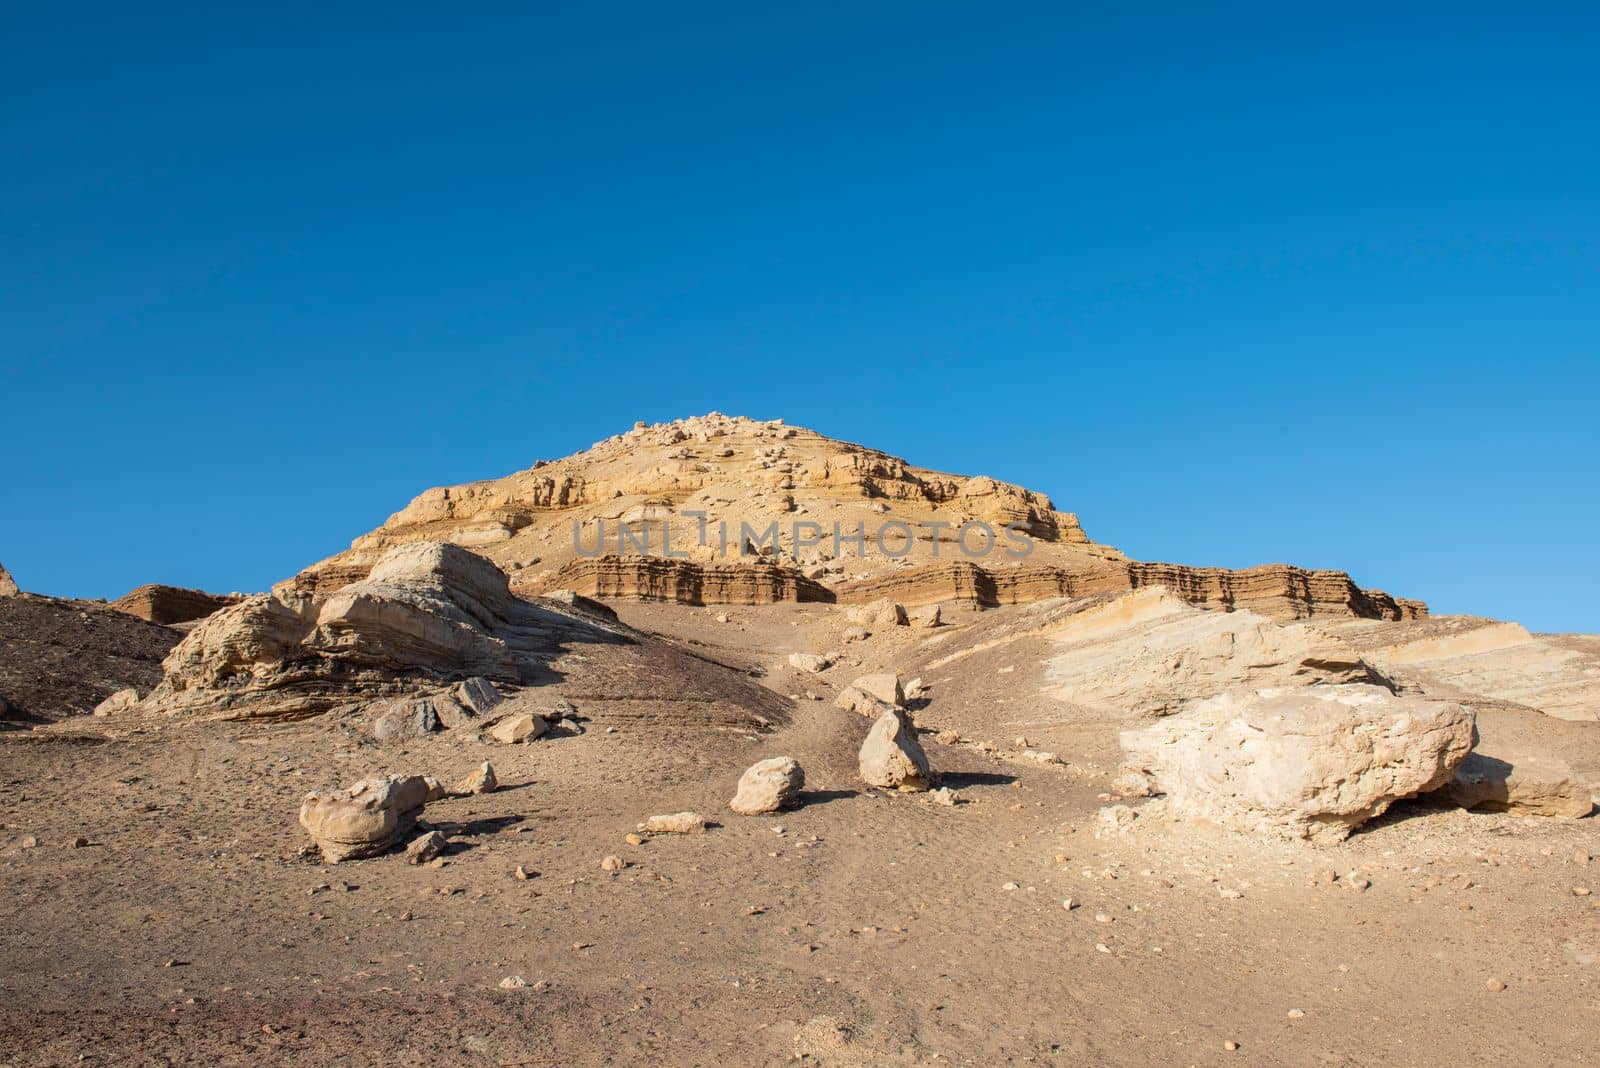 Rocky slope landscape in an arid desert environment with large pyramid mountain at top